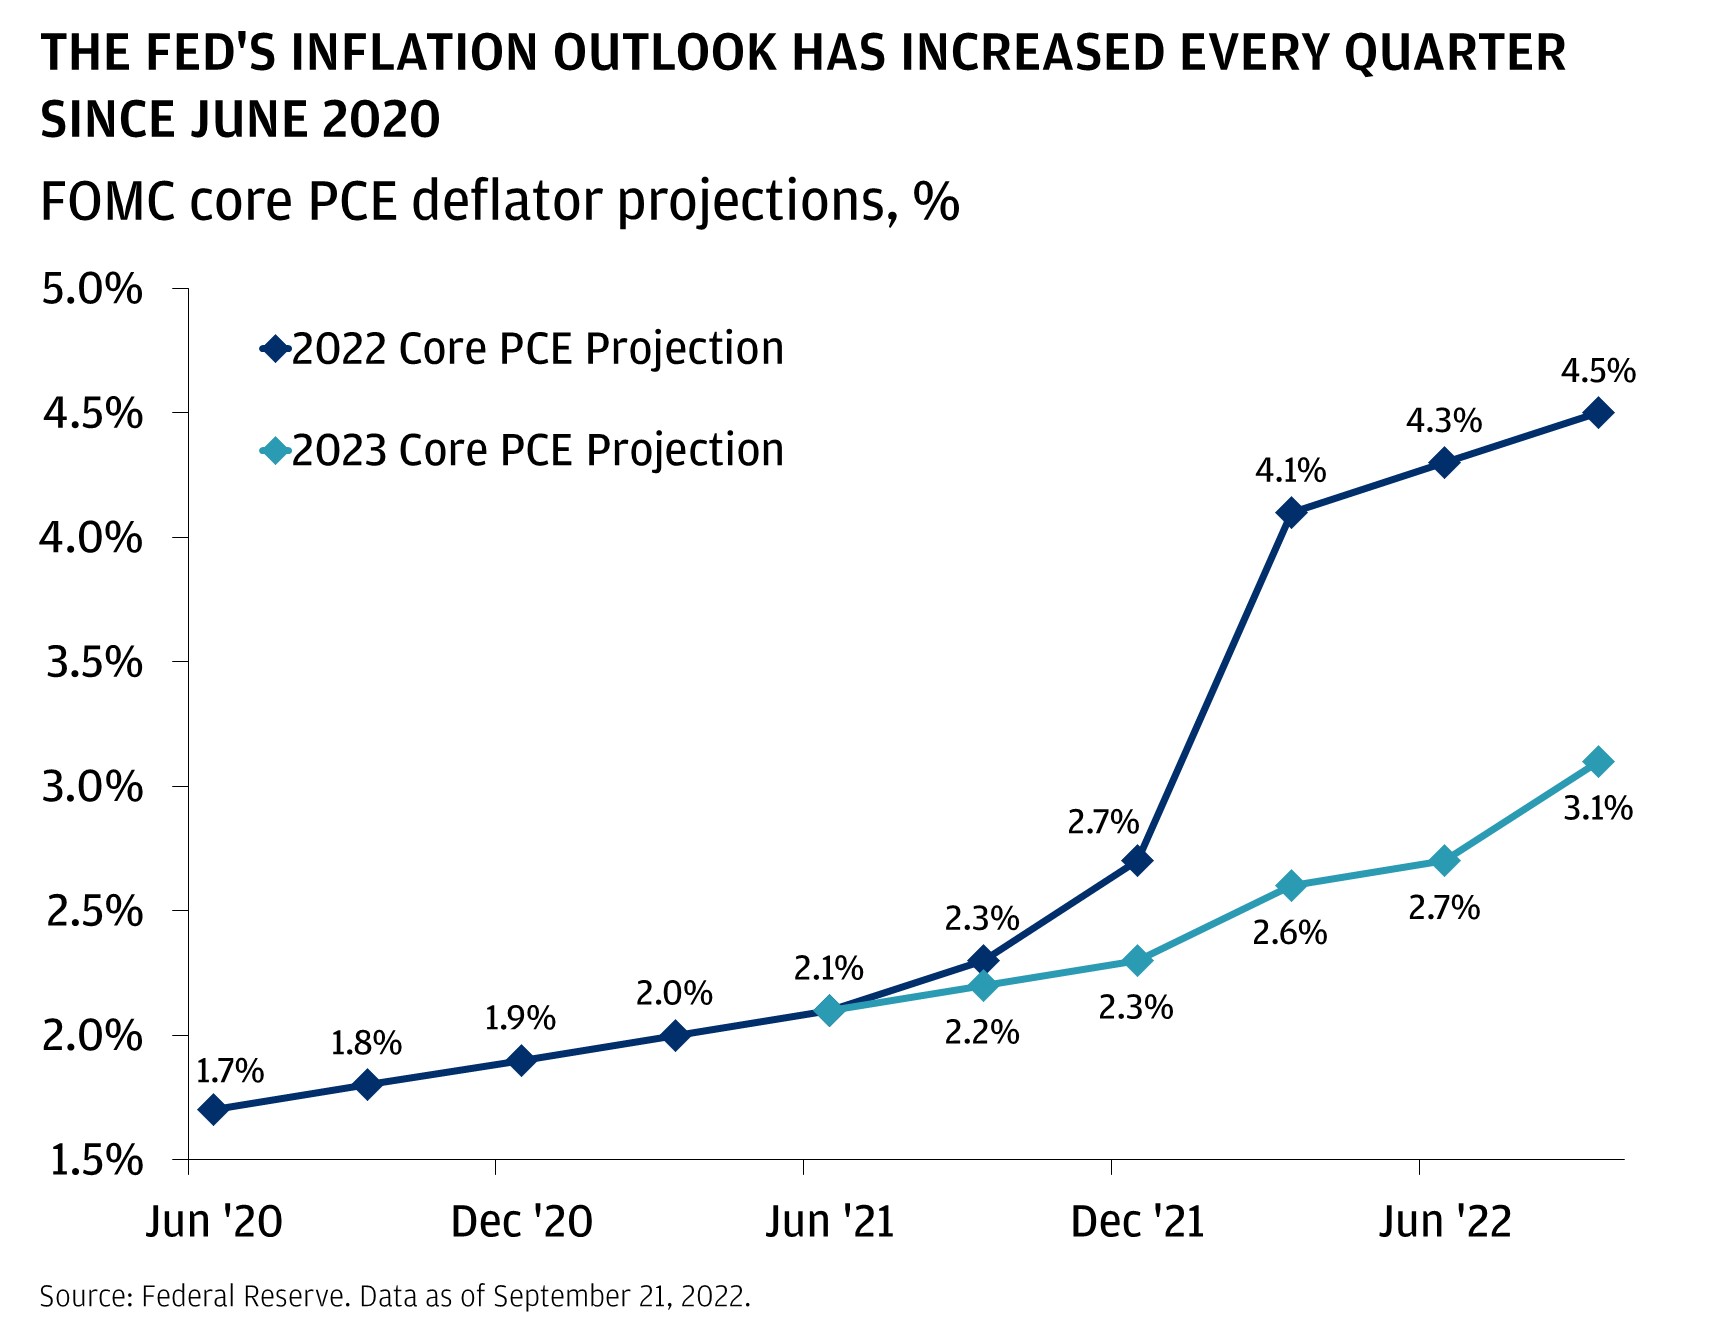 This chart shows the FOMC core PCE deflator projects in 2022 and 2023 from June 2020 to September 2022.